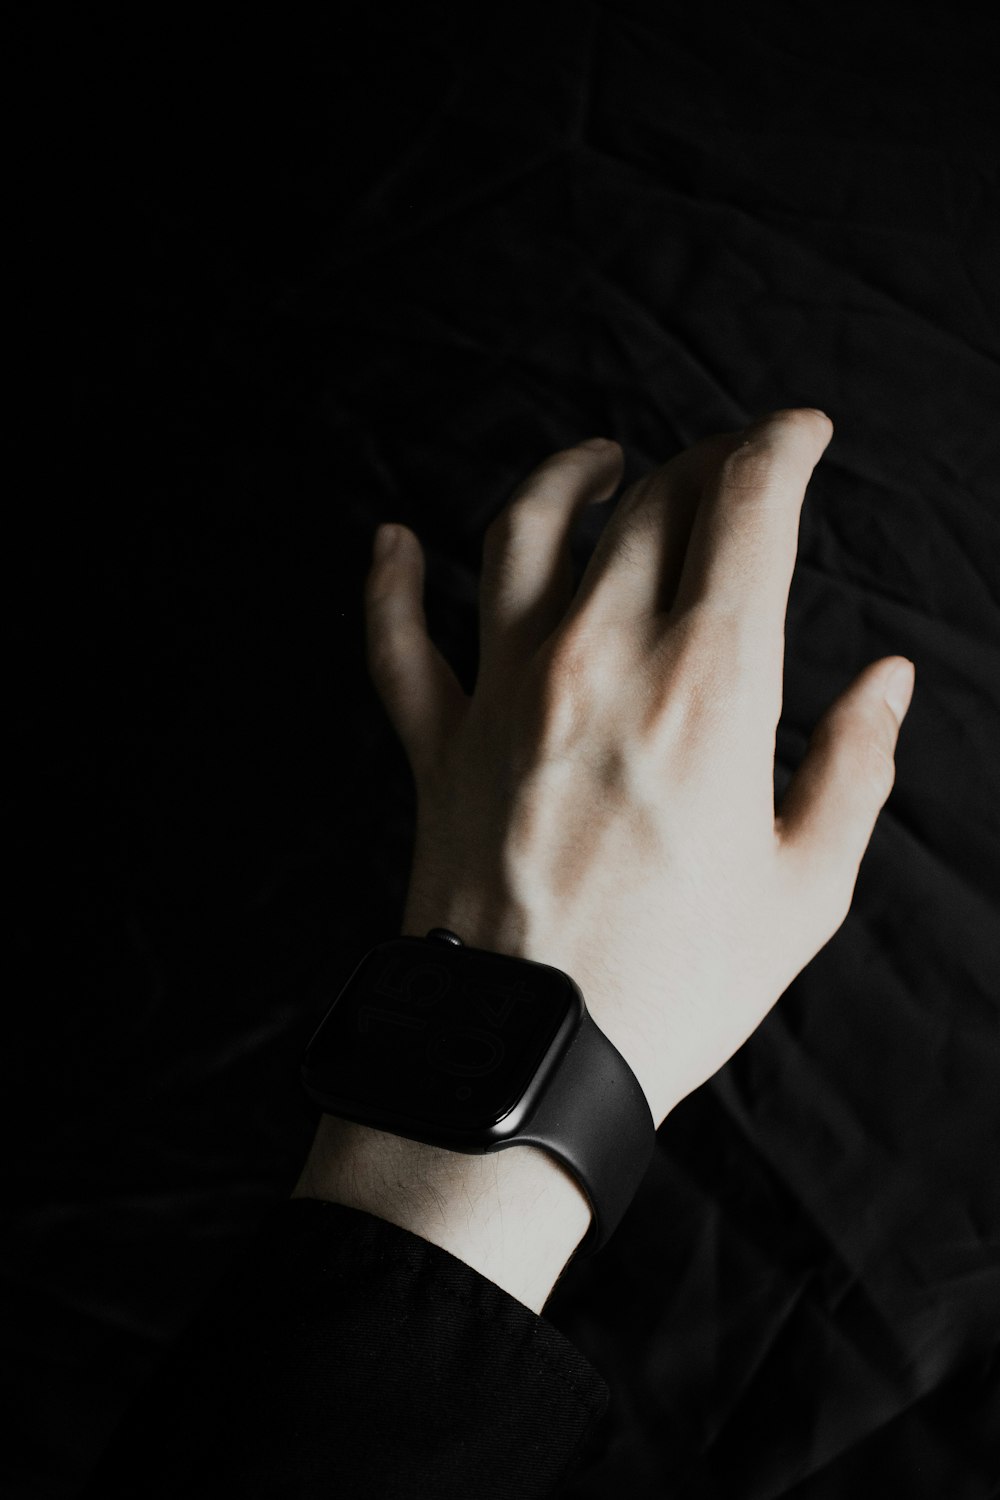 a person's hand with a watch on their wrist